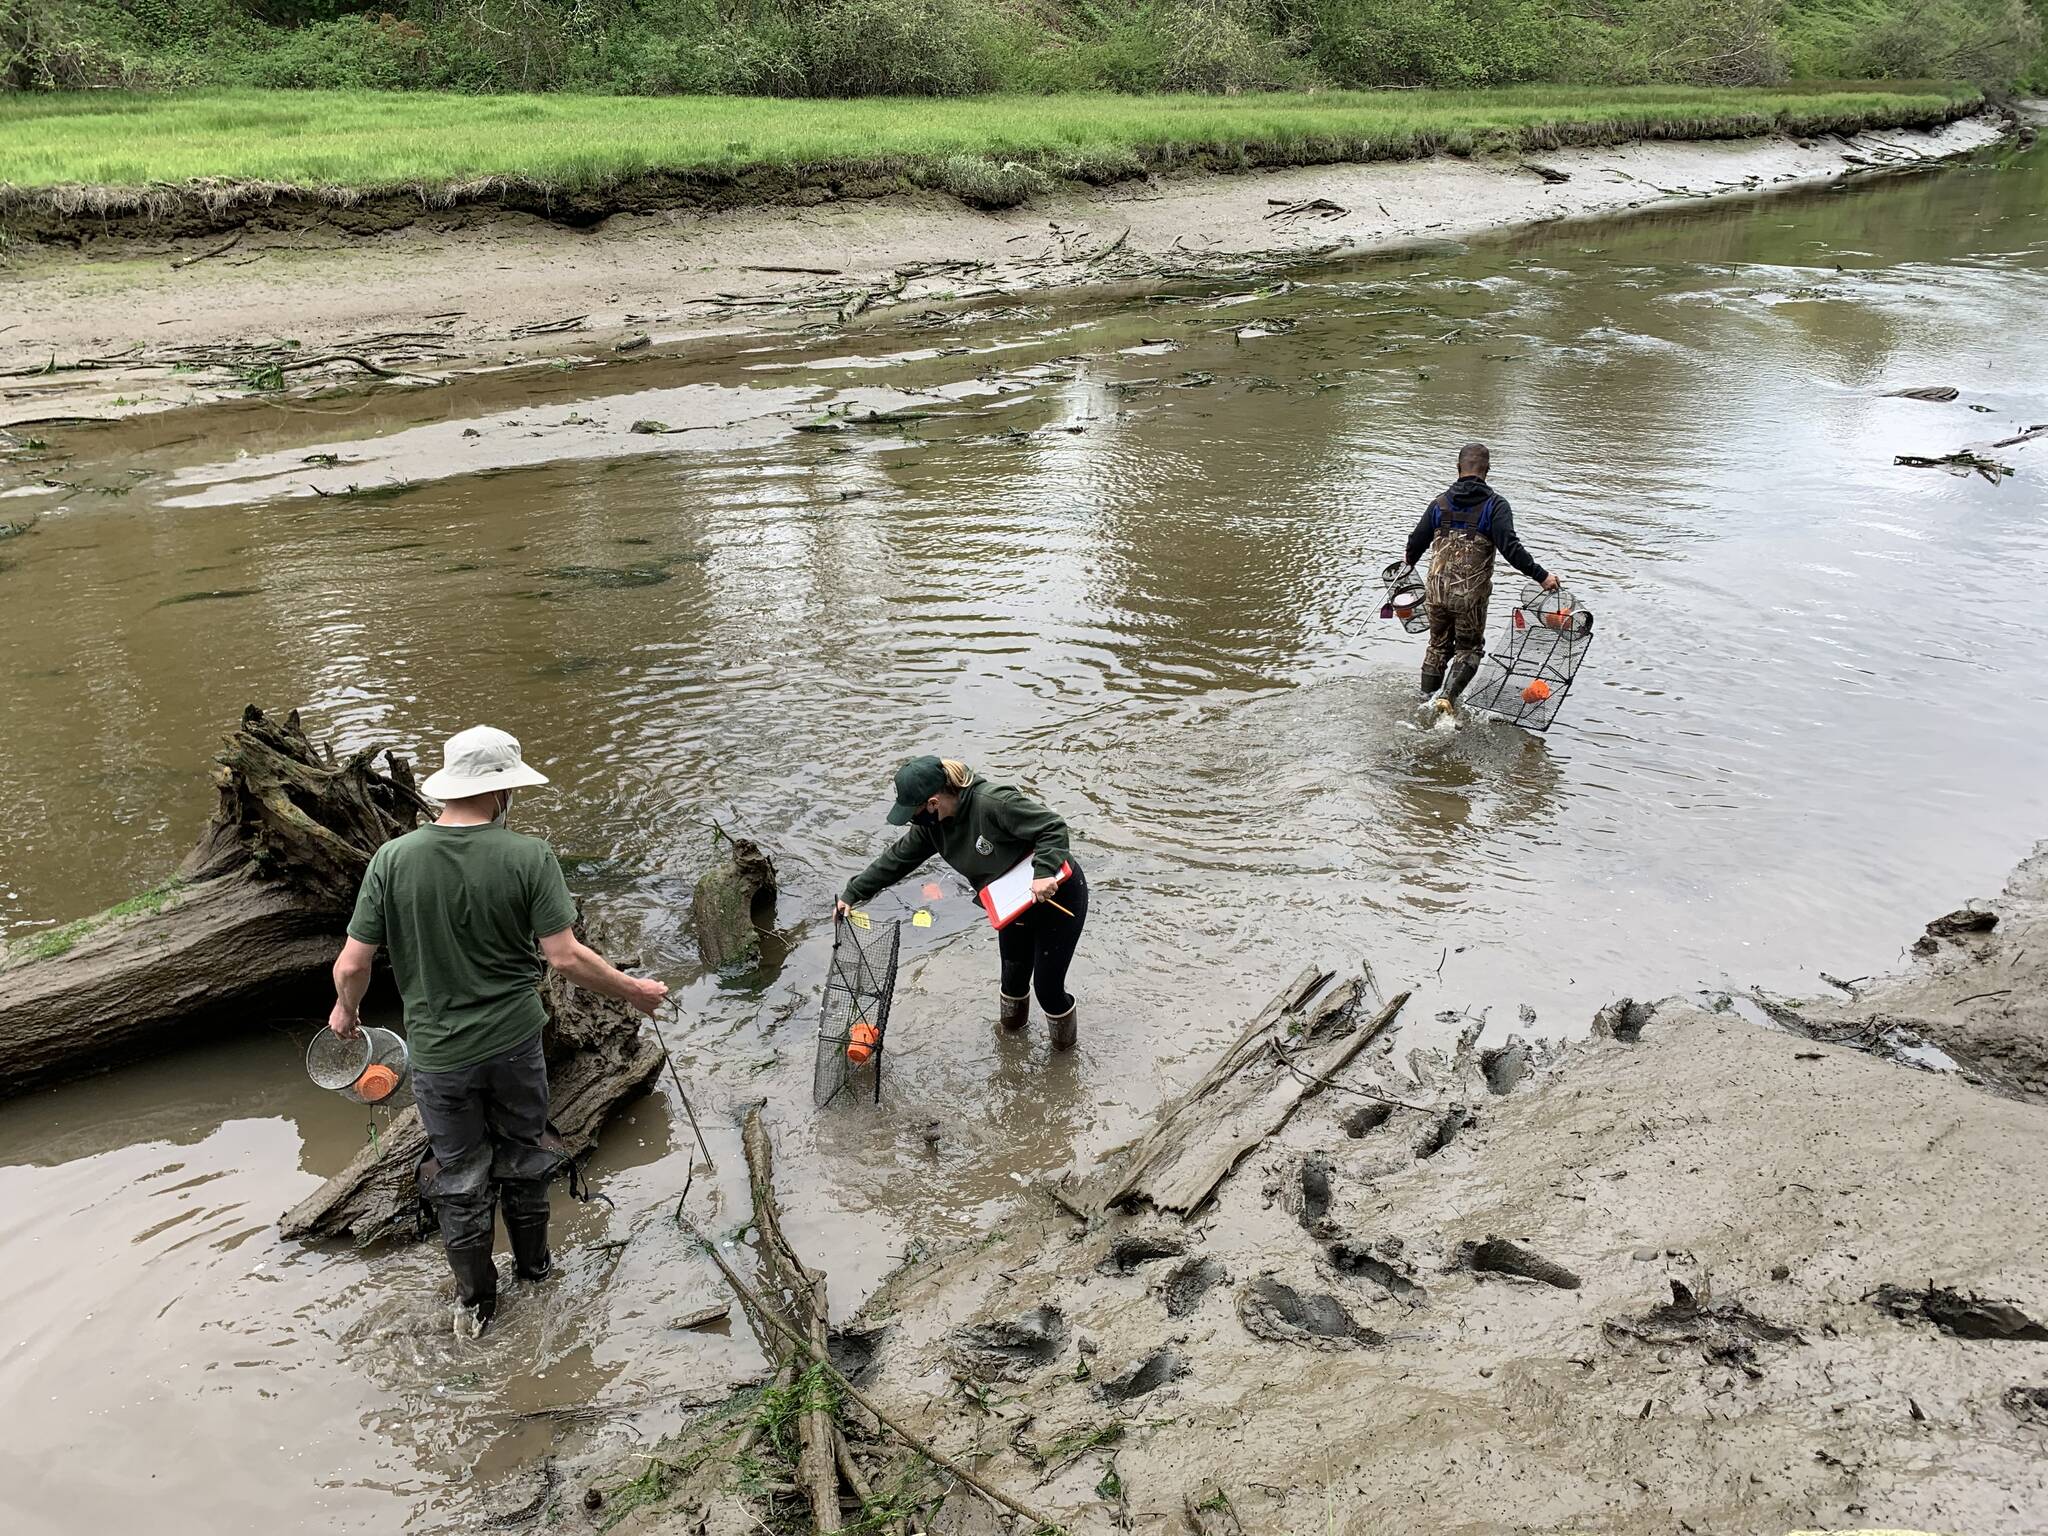 Trapping European Green Crabs. From left to right, WDFW staff Nate Goldschmidt and Lindsey Parker, and Veteran Corps intern Johnathan Hallenbeck. Photo courtesy of Chase Gunnell.